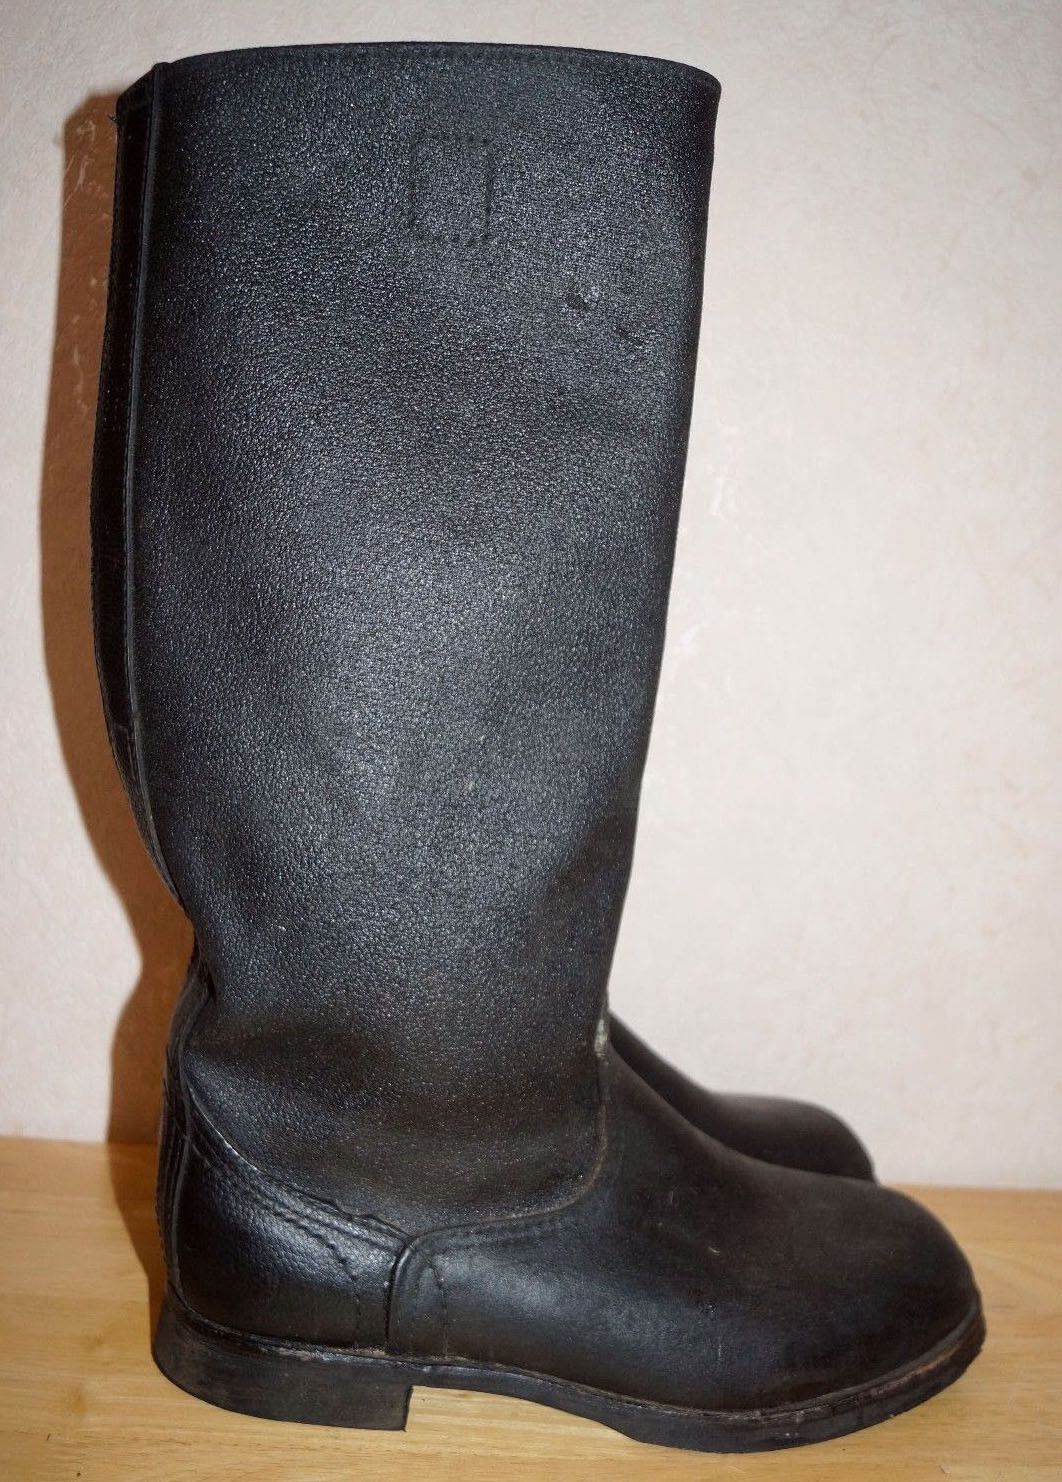 Soviet Russian Military Army Soldier Jack Boots 44 USSR